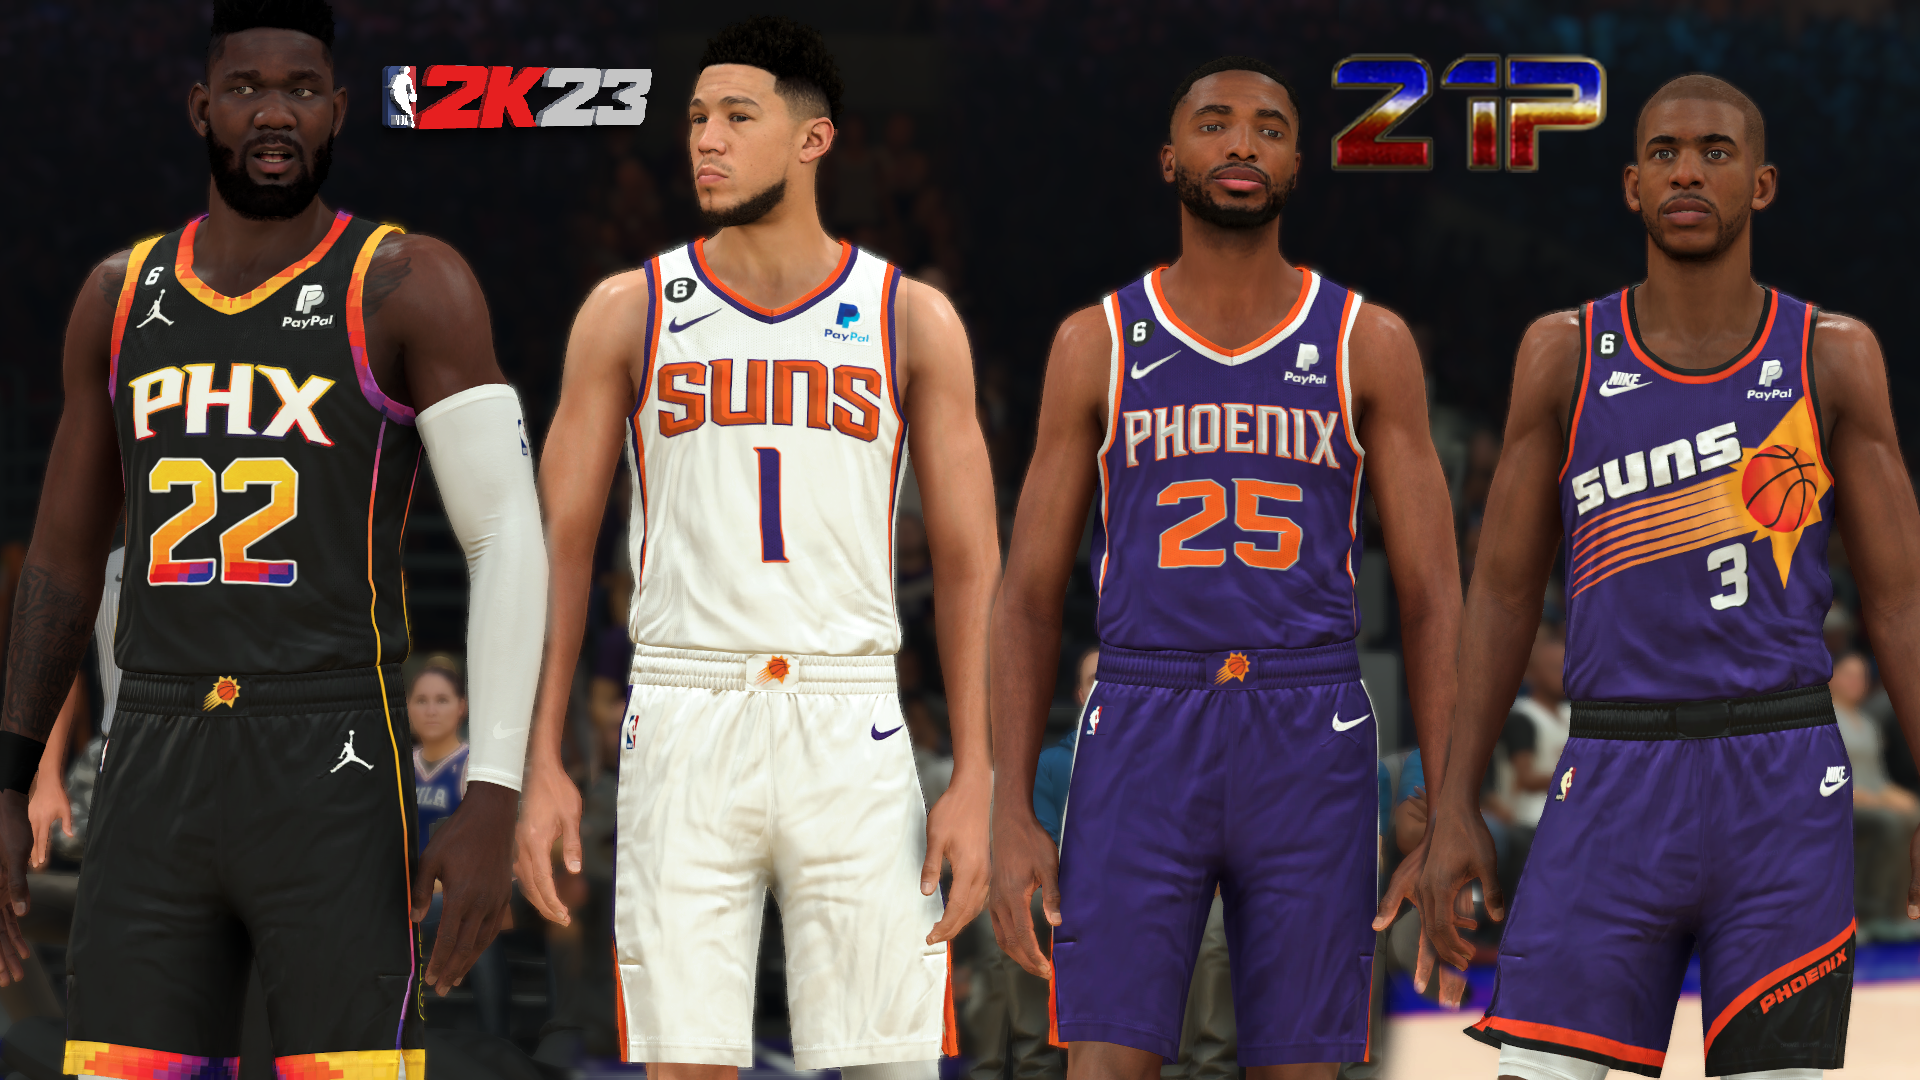 Is the valley edition Jerseys from Phoenix Suns in the game? : r/NBA2k